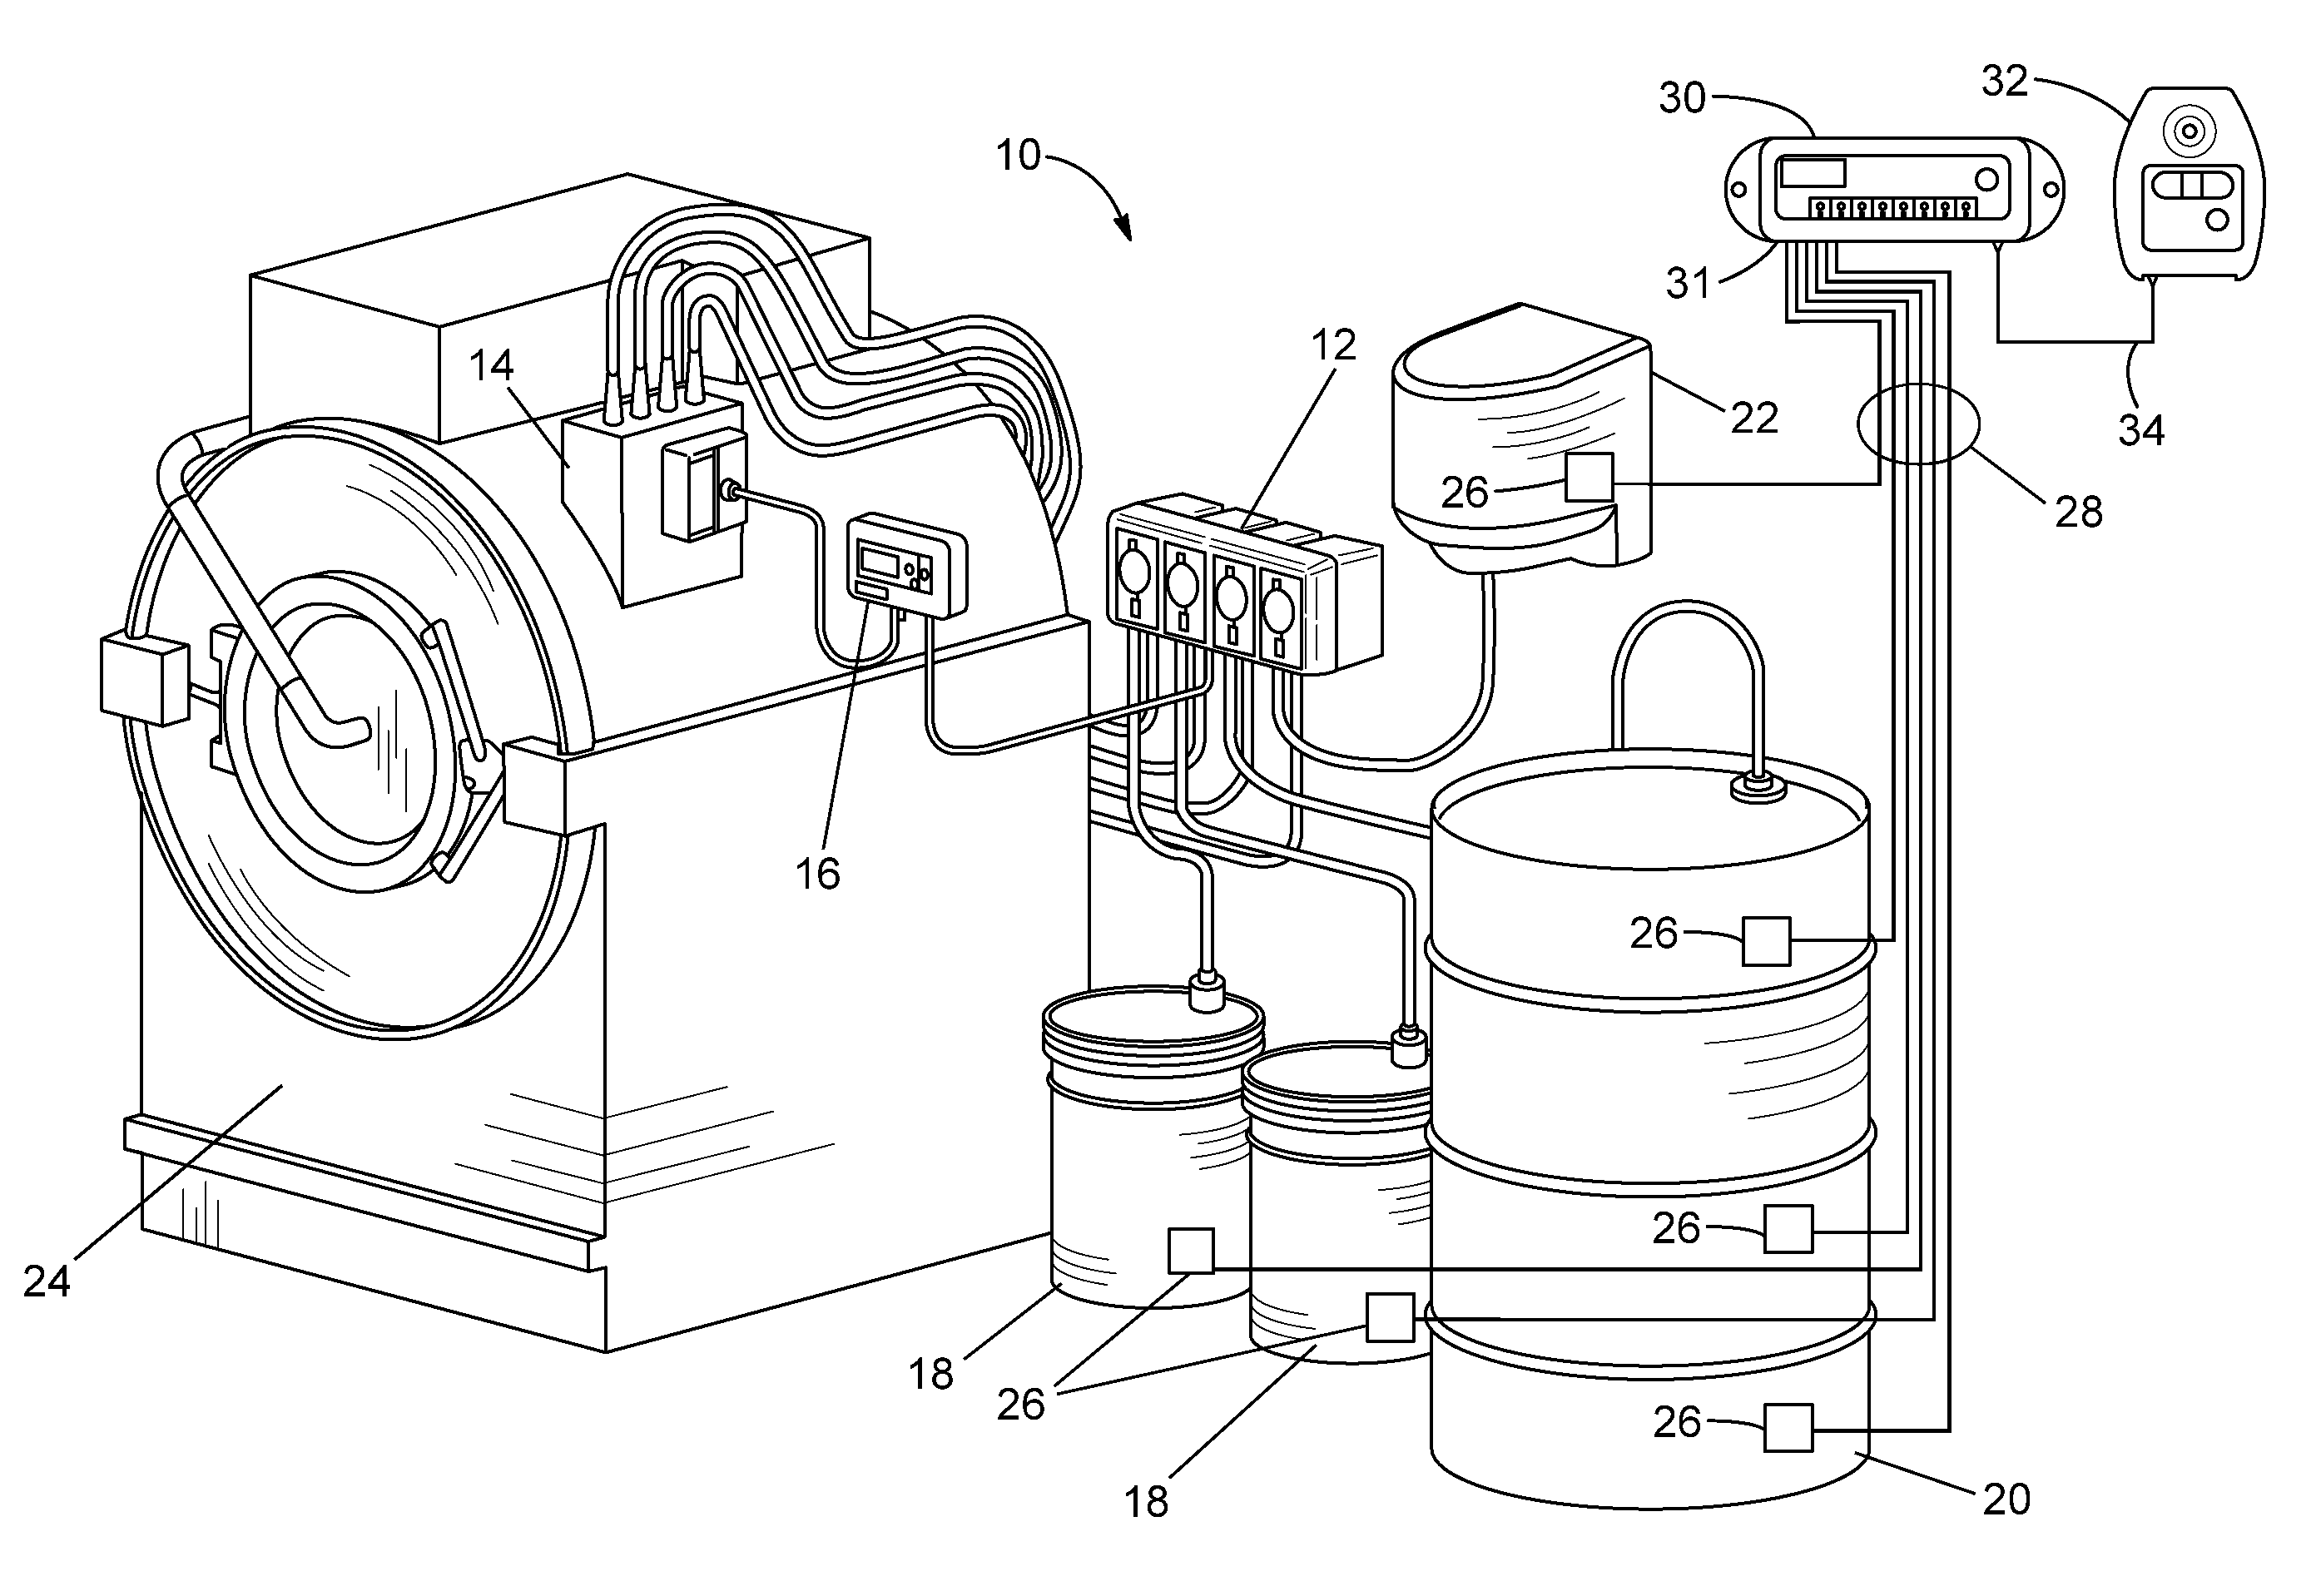 System and method for product level monitoring in a chemical dispensing system